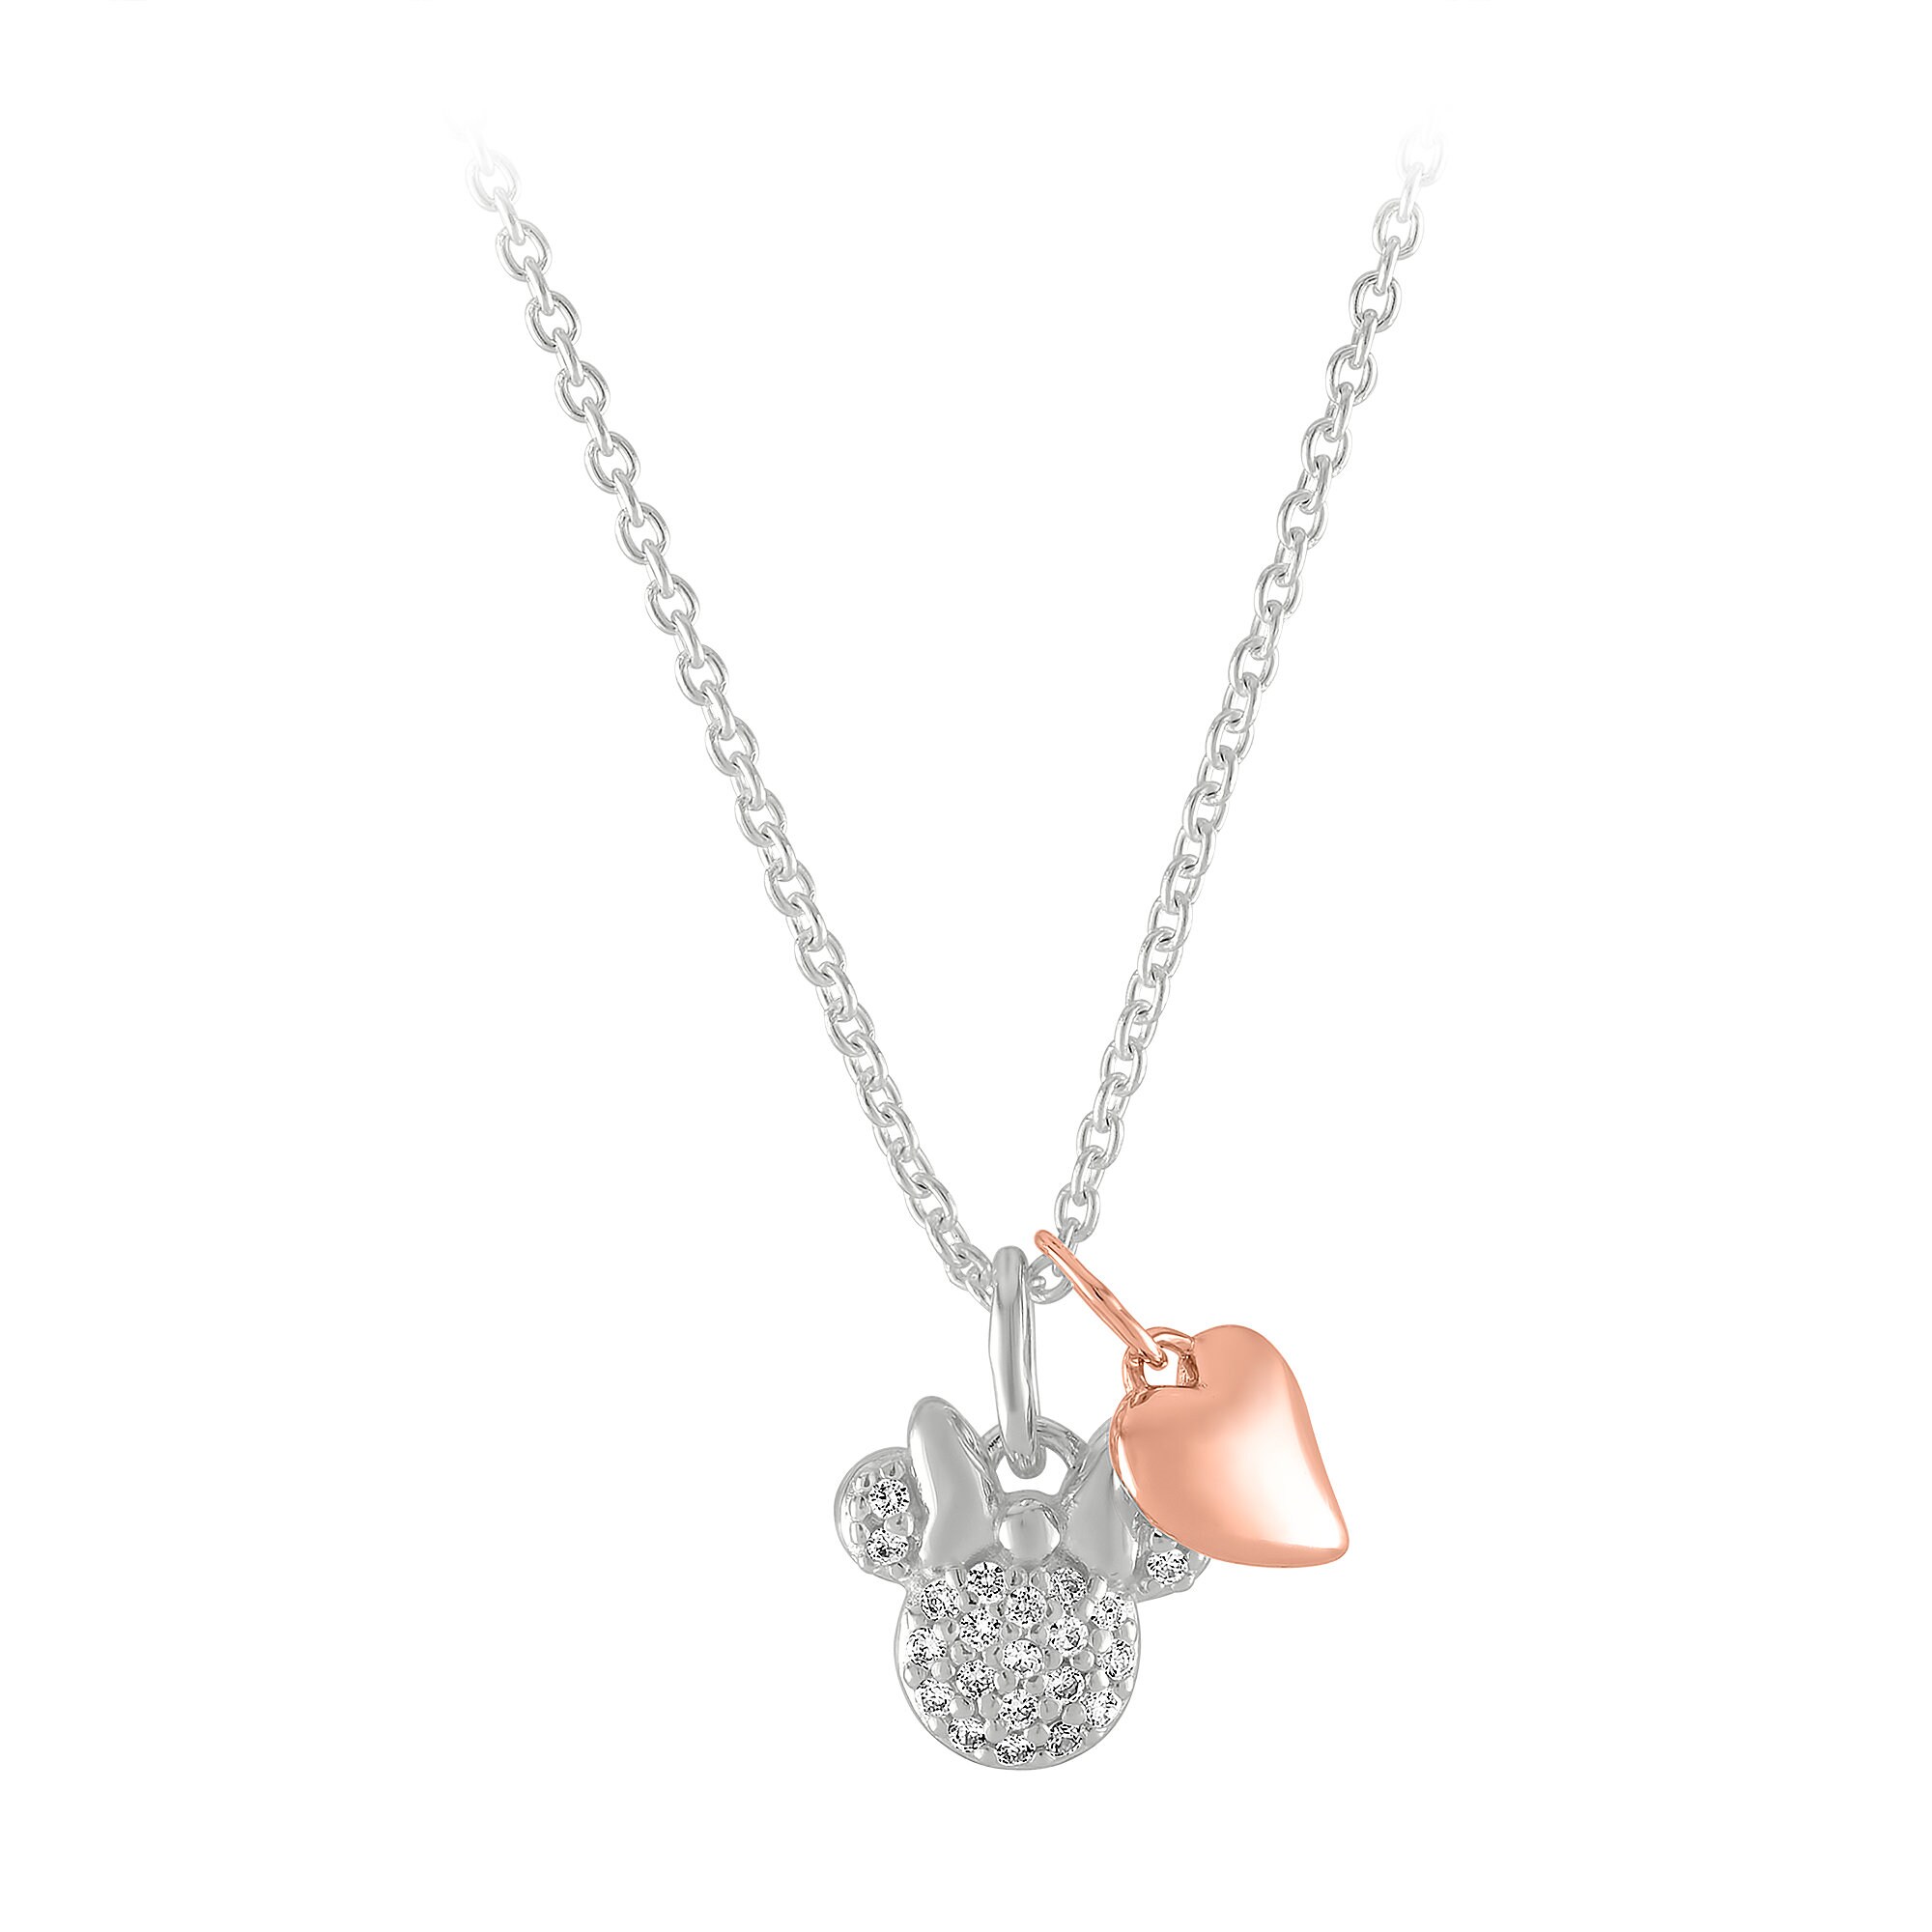 Minnie Mouse and Heart Necklace by Rebecca Hook